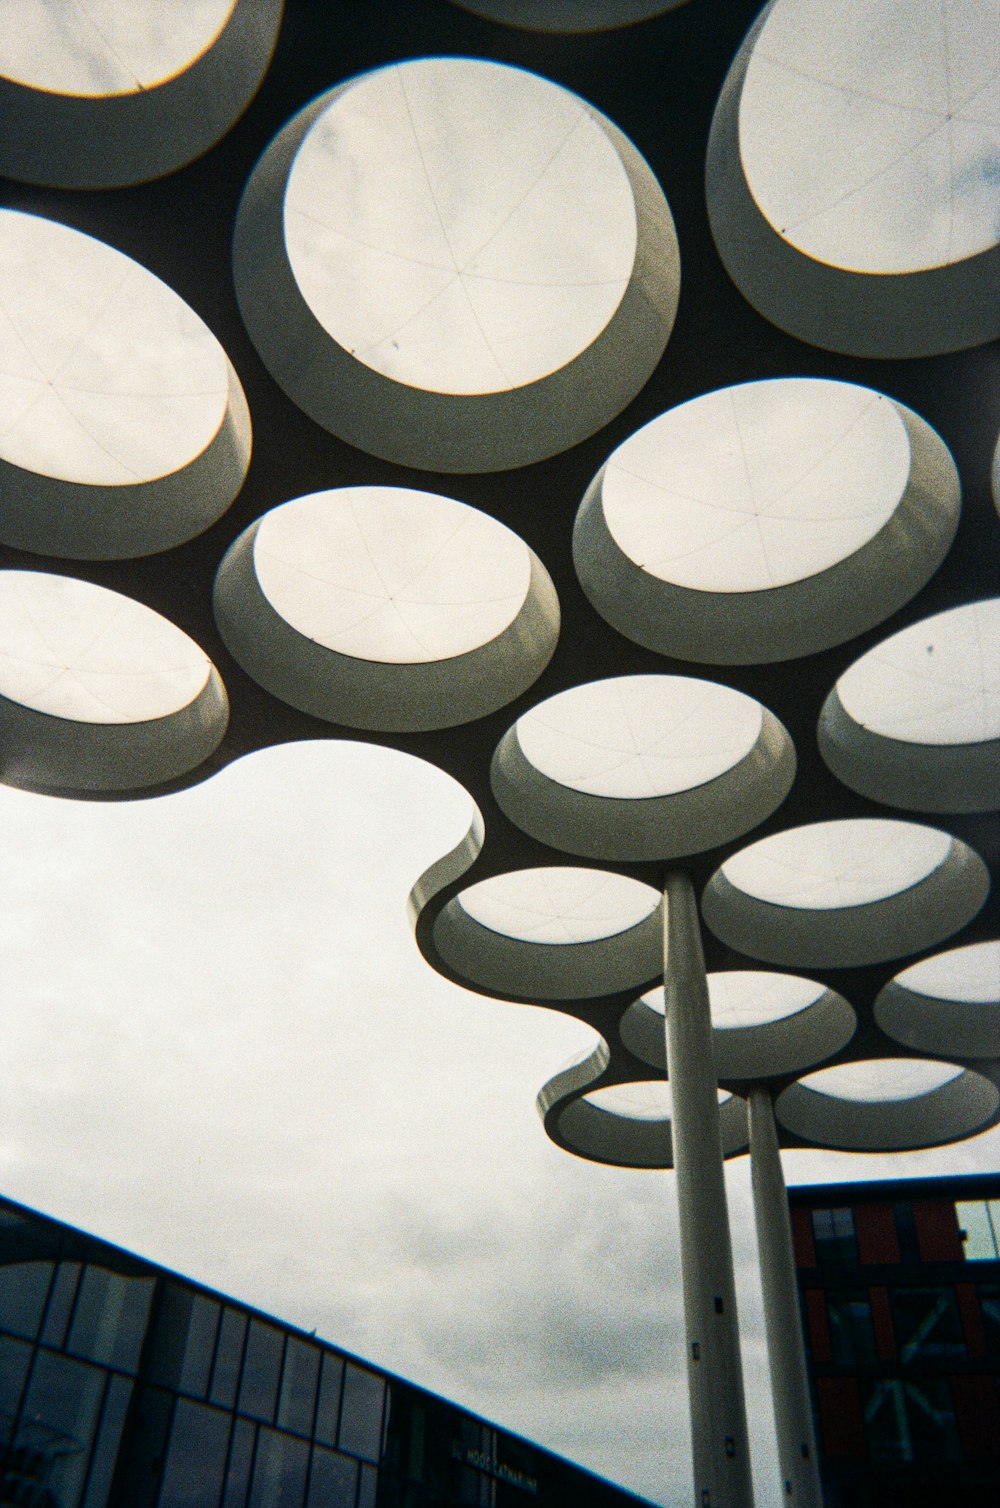 a group of circular objects in front of a building